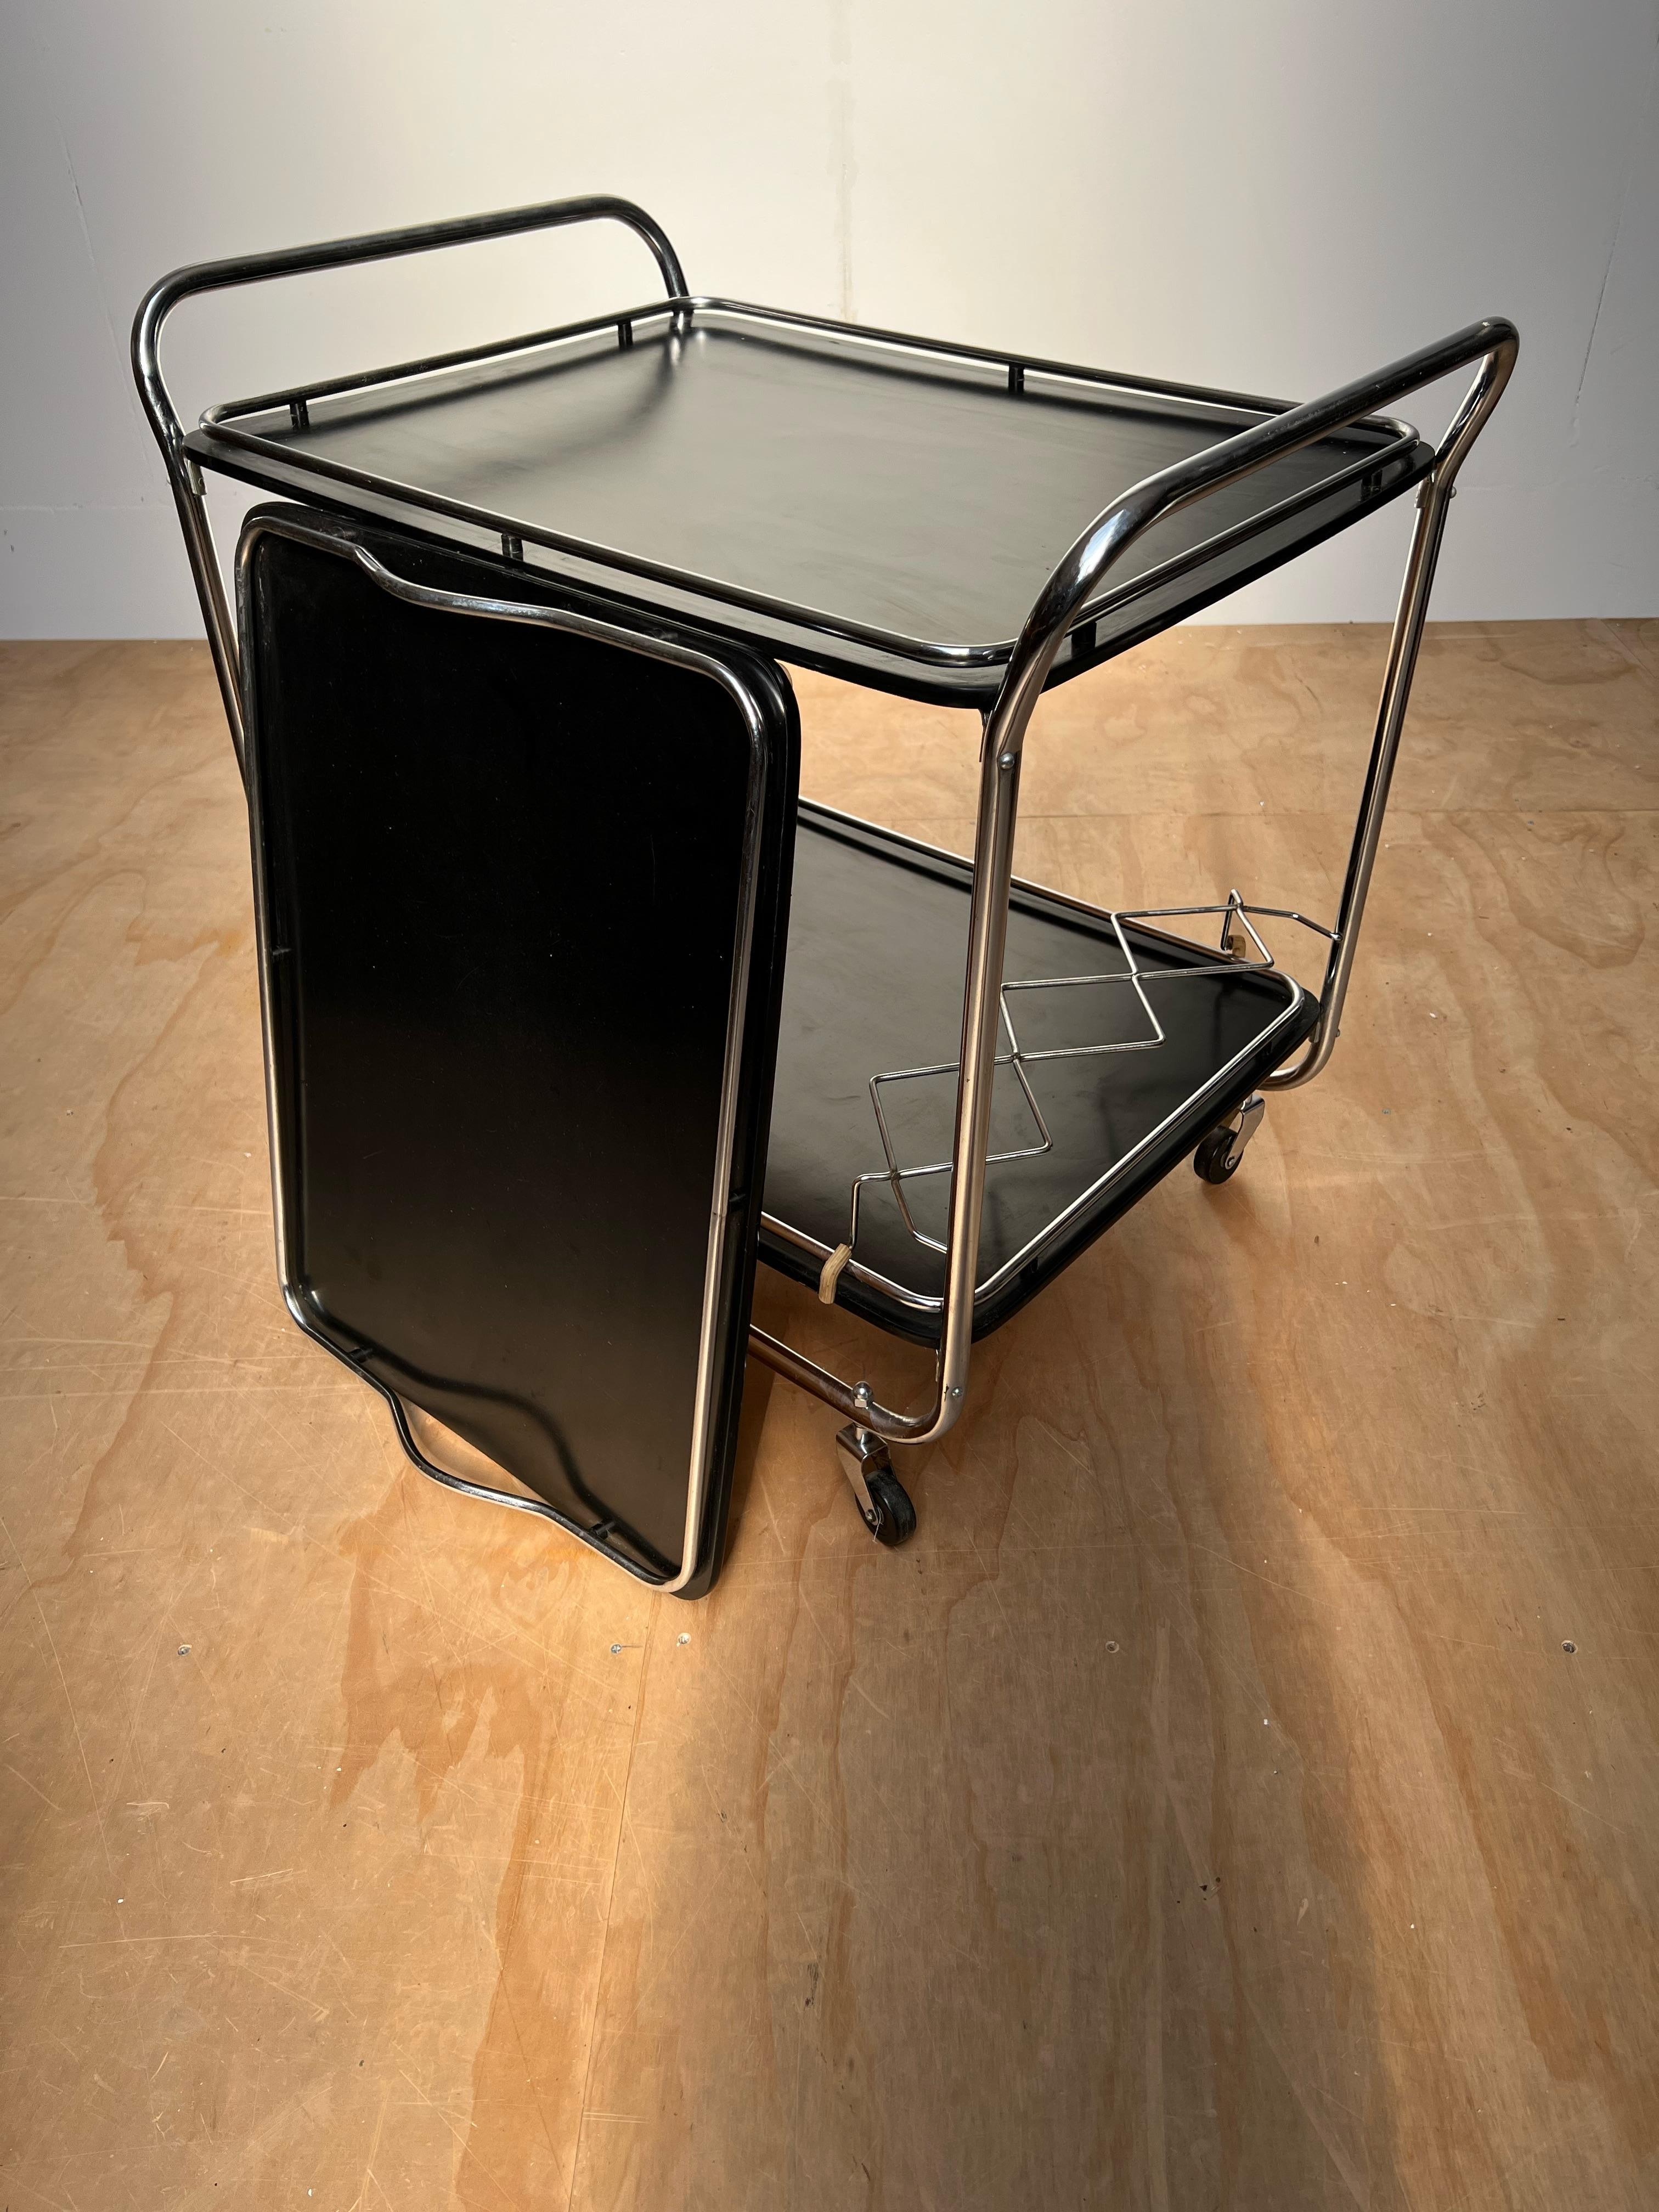 Midcentury Modern Drinks Trolley / Bar Cart w. Tray, Blackened Wood and Chrome For Sale 2